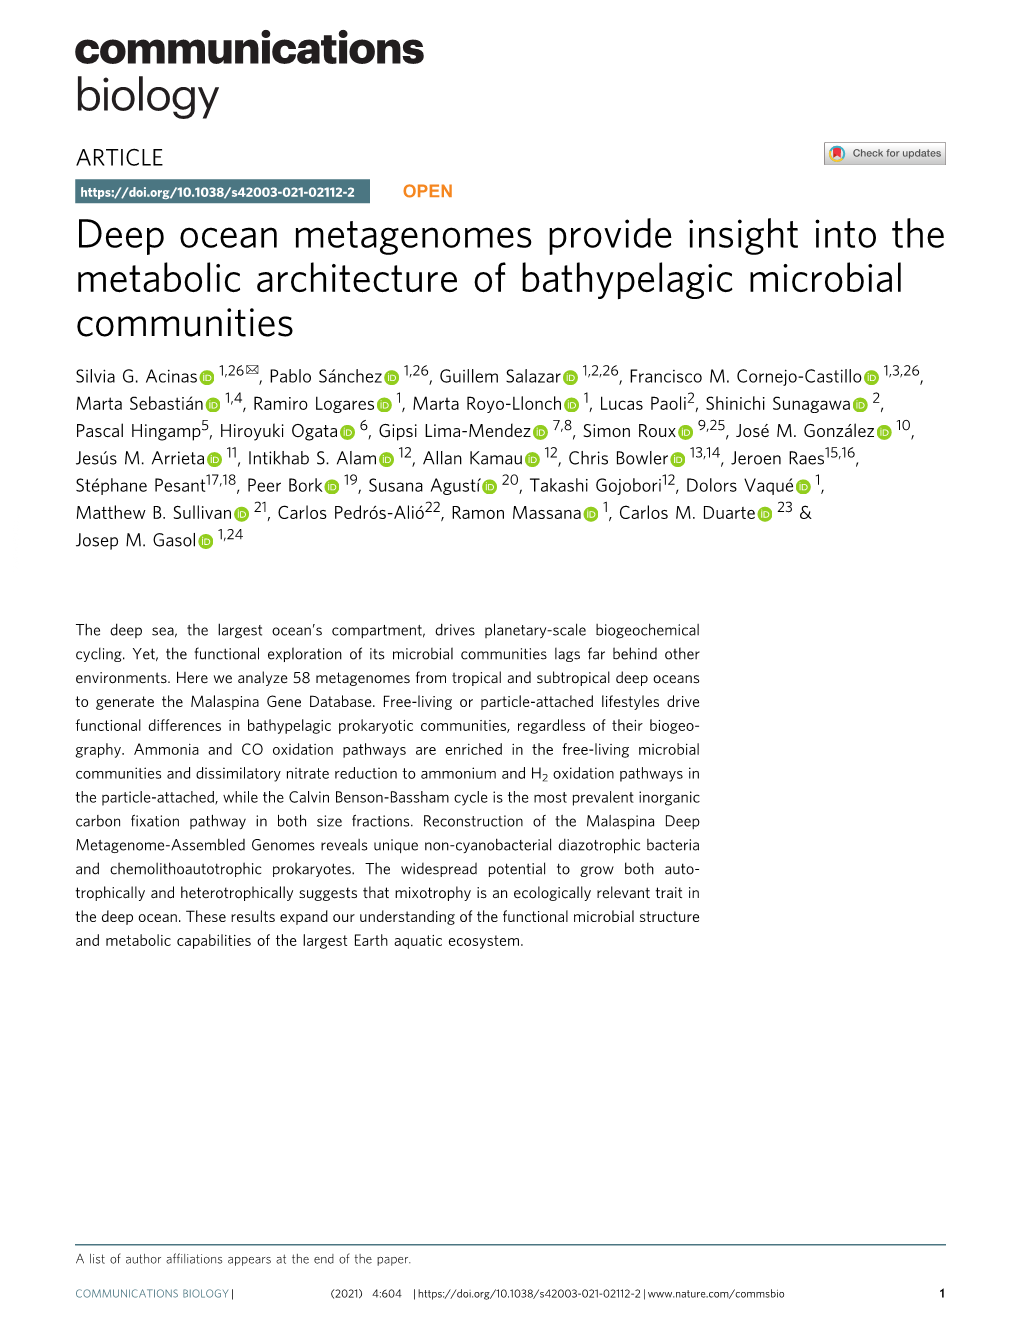 Deep Ocean Metagenomes Provide Insight Into the Metabolic Architecture of Bathypelagic Microbial Communities ✉ Silvia G